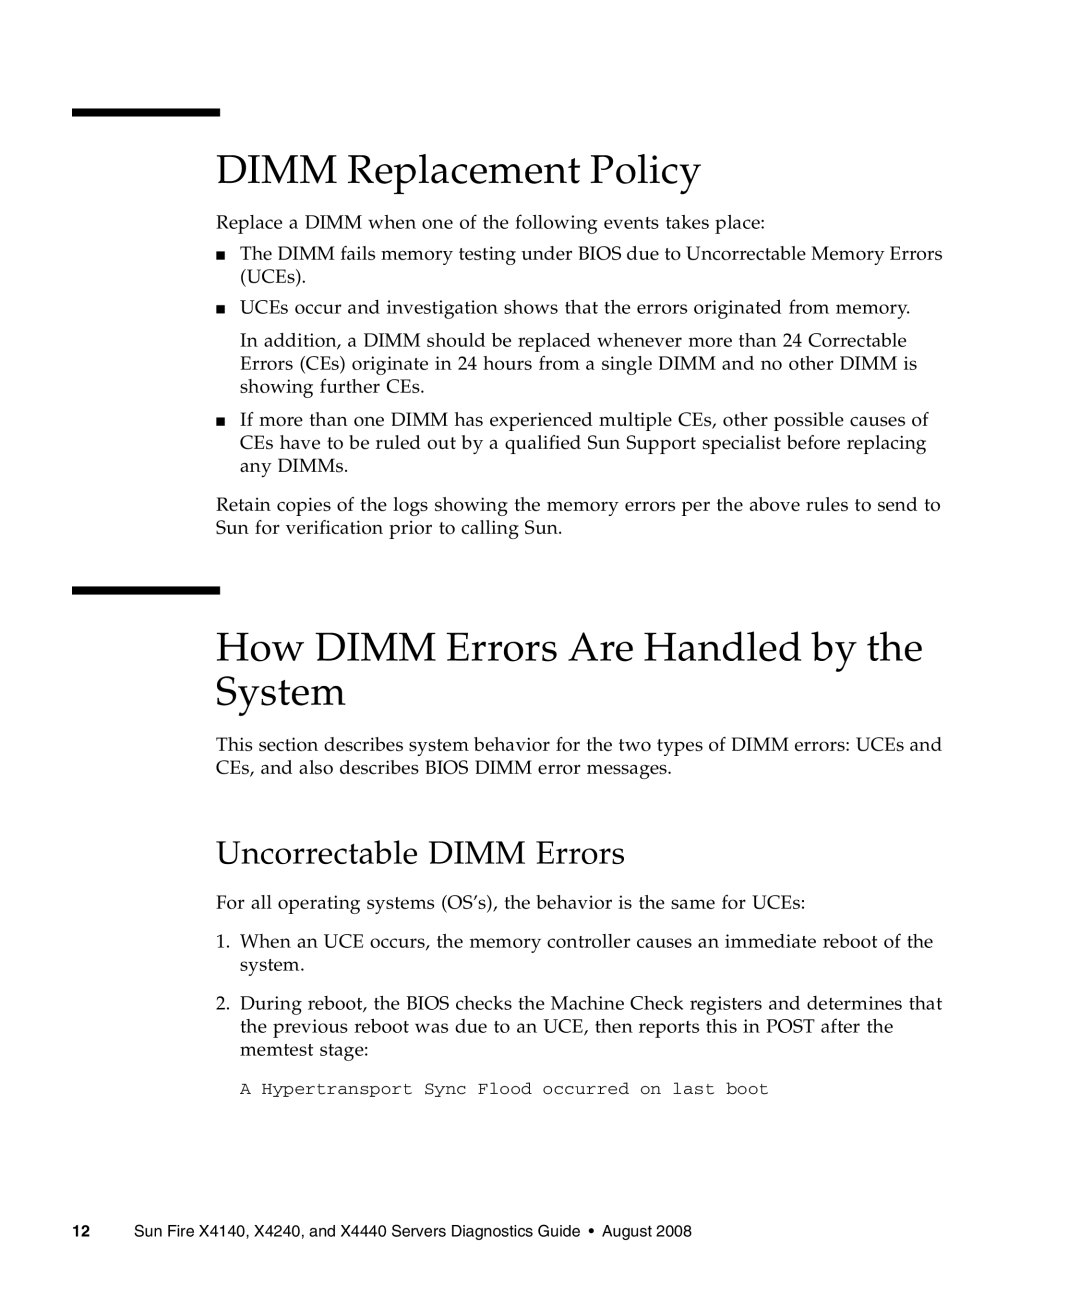 Sun Microsystems X4440 manual DIMM Replacement Policy, How DIMM Errors Are Handled by the System, Uncorrectable DIMM Errors 